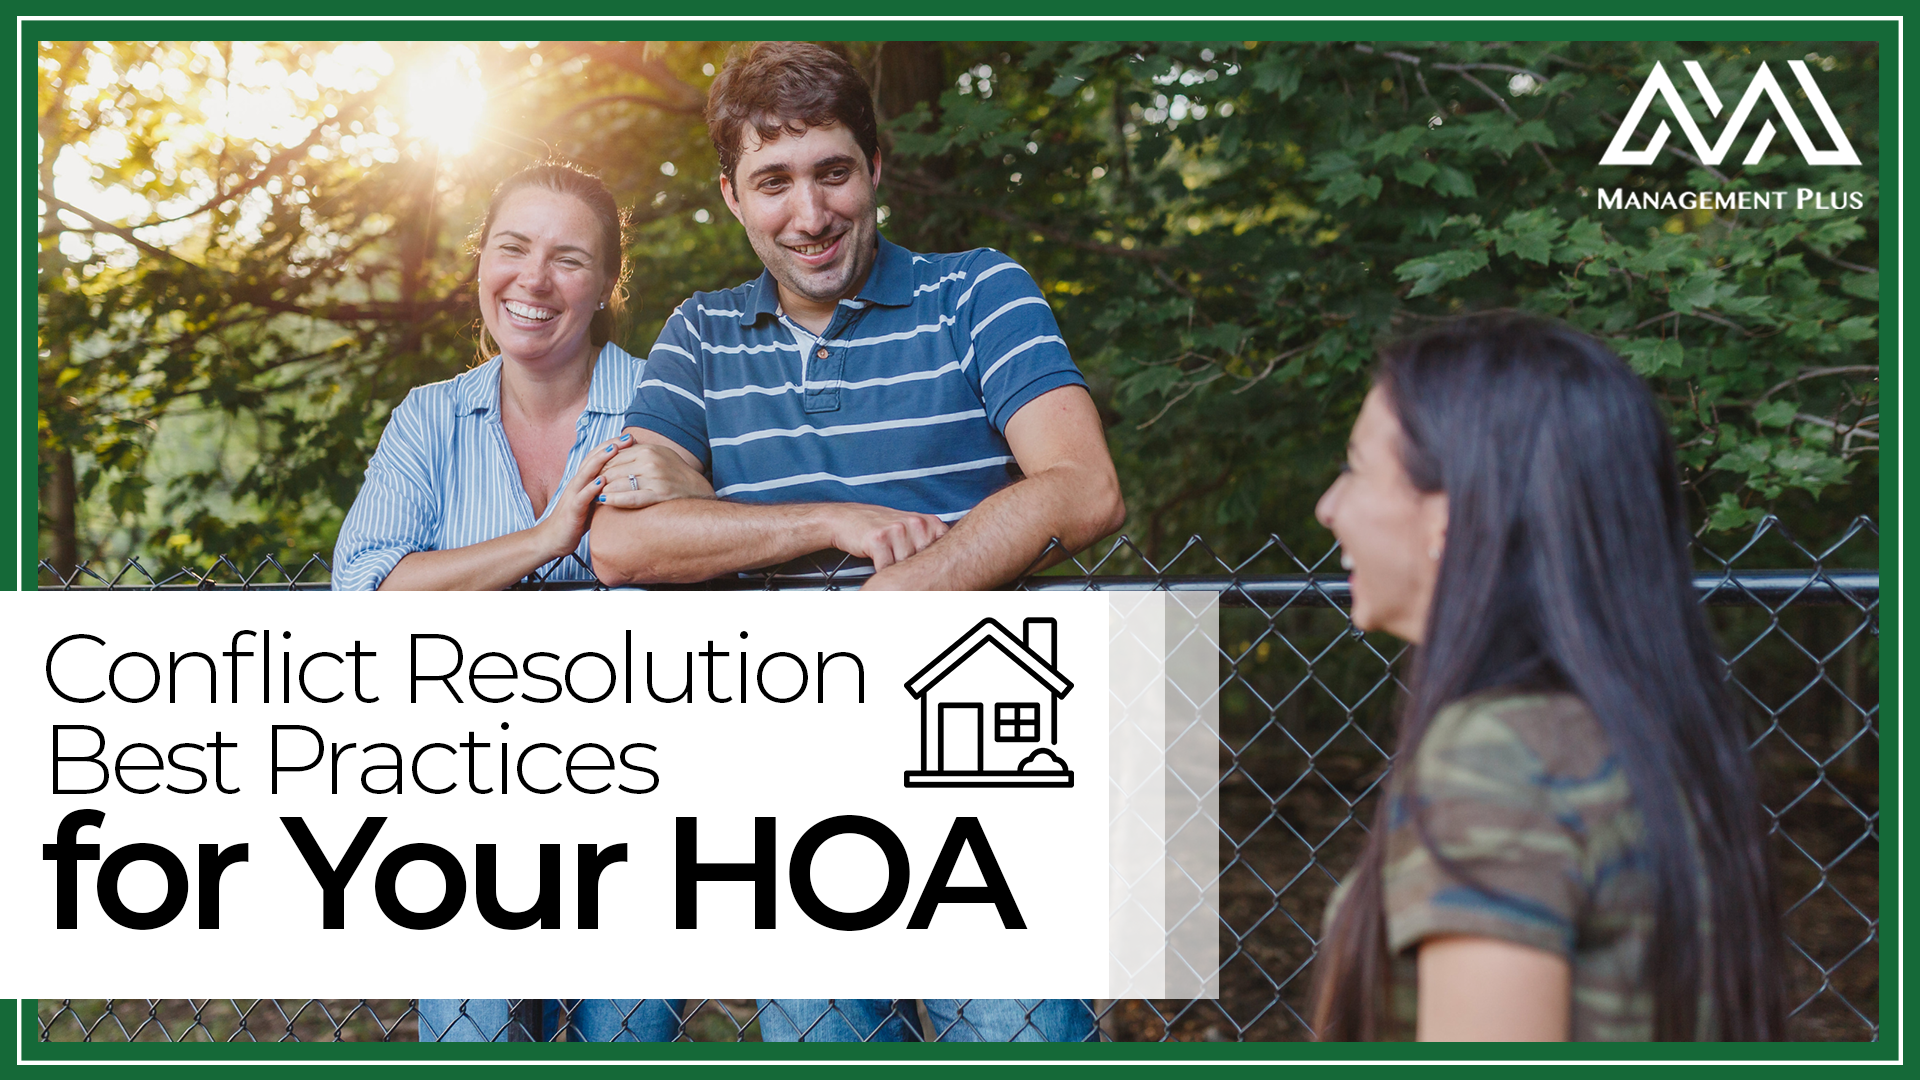 Three people laughing. Below, the text reads "Conflict Resolution Best Practices for Your HOA"